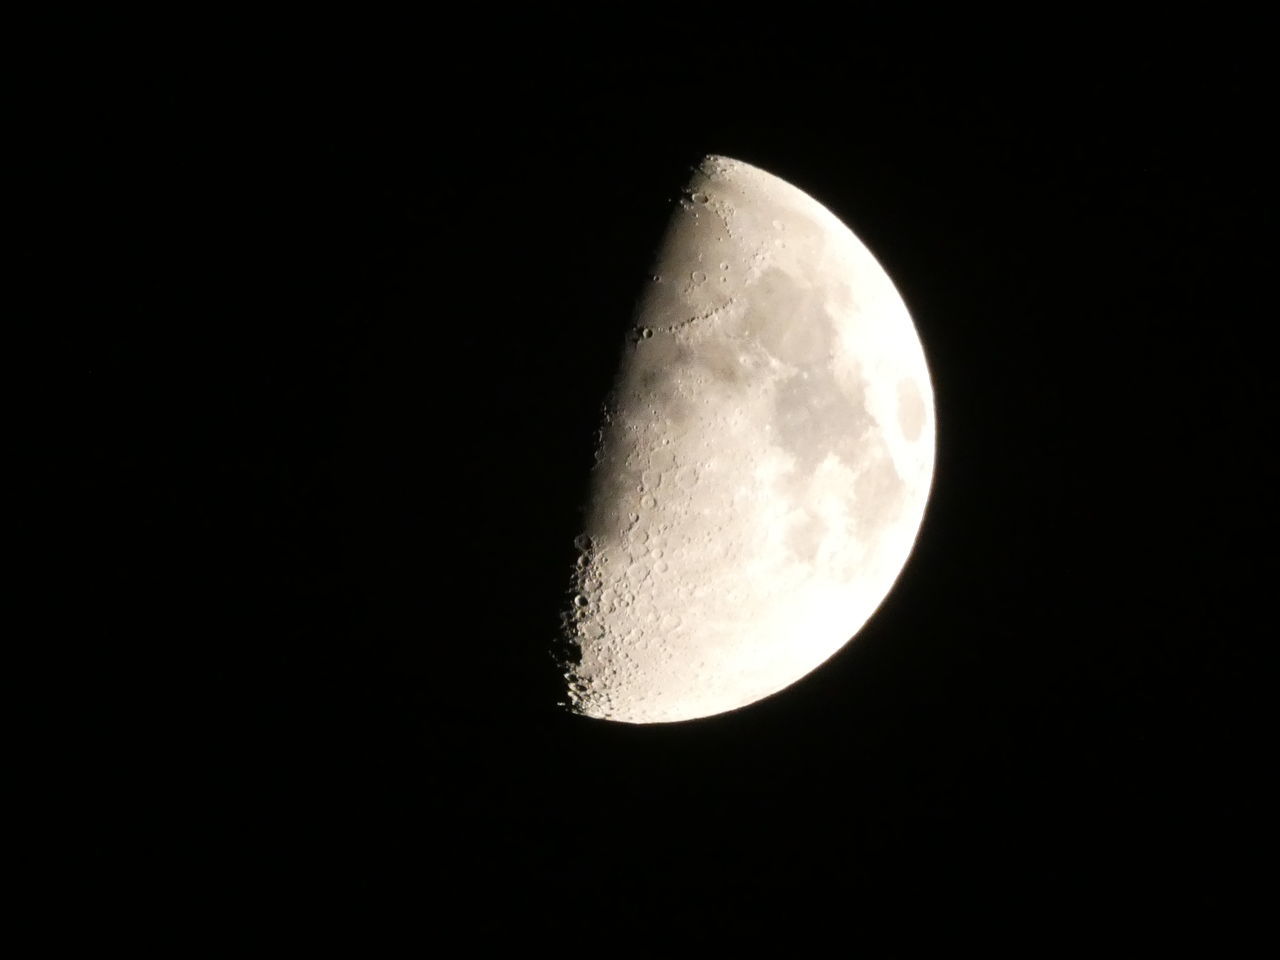 LOW ANGLE VIEW OF MOON IN SKY AT NIGHT